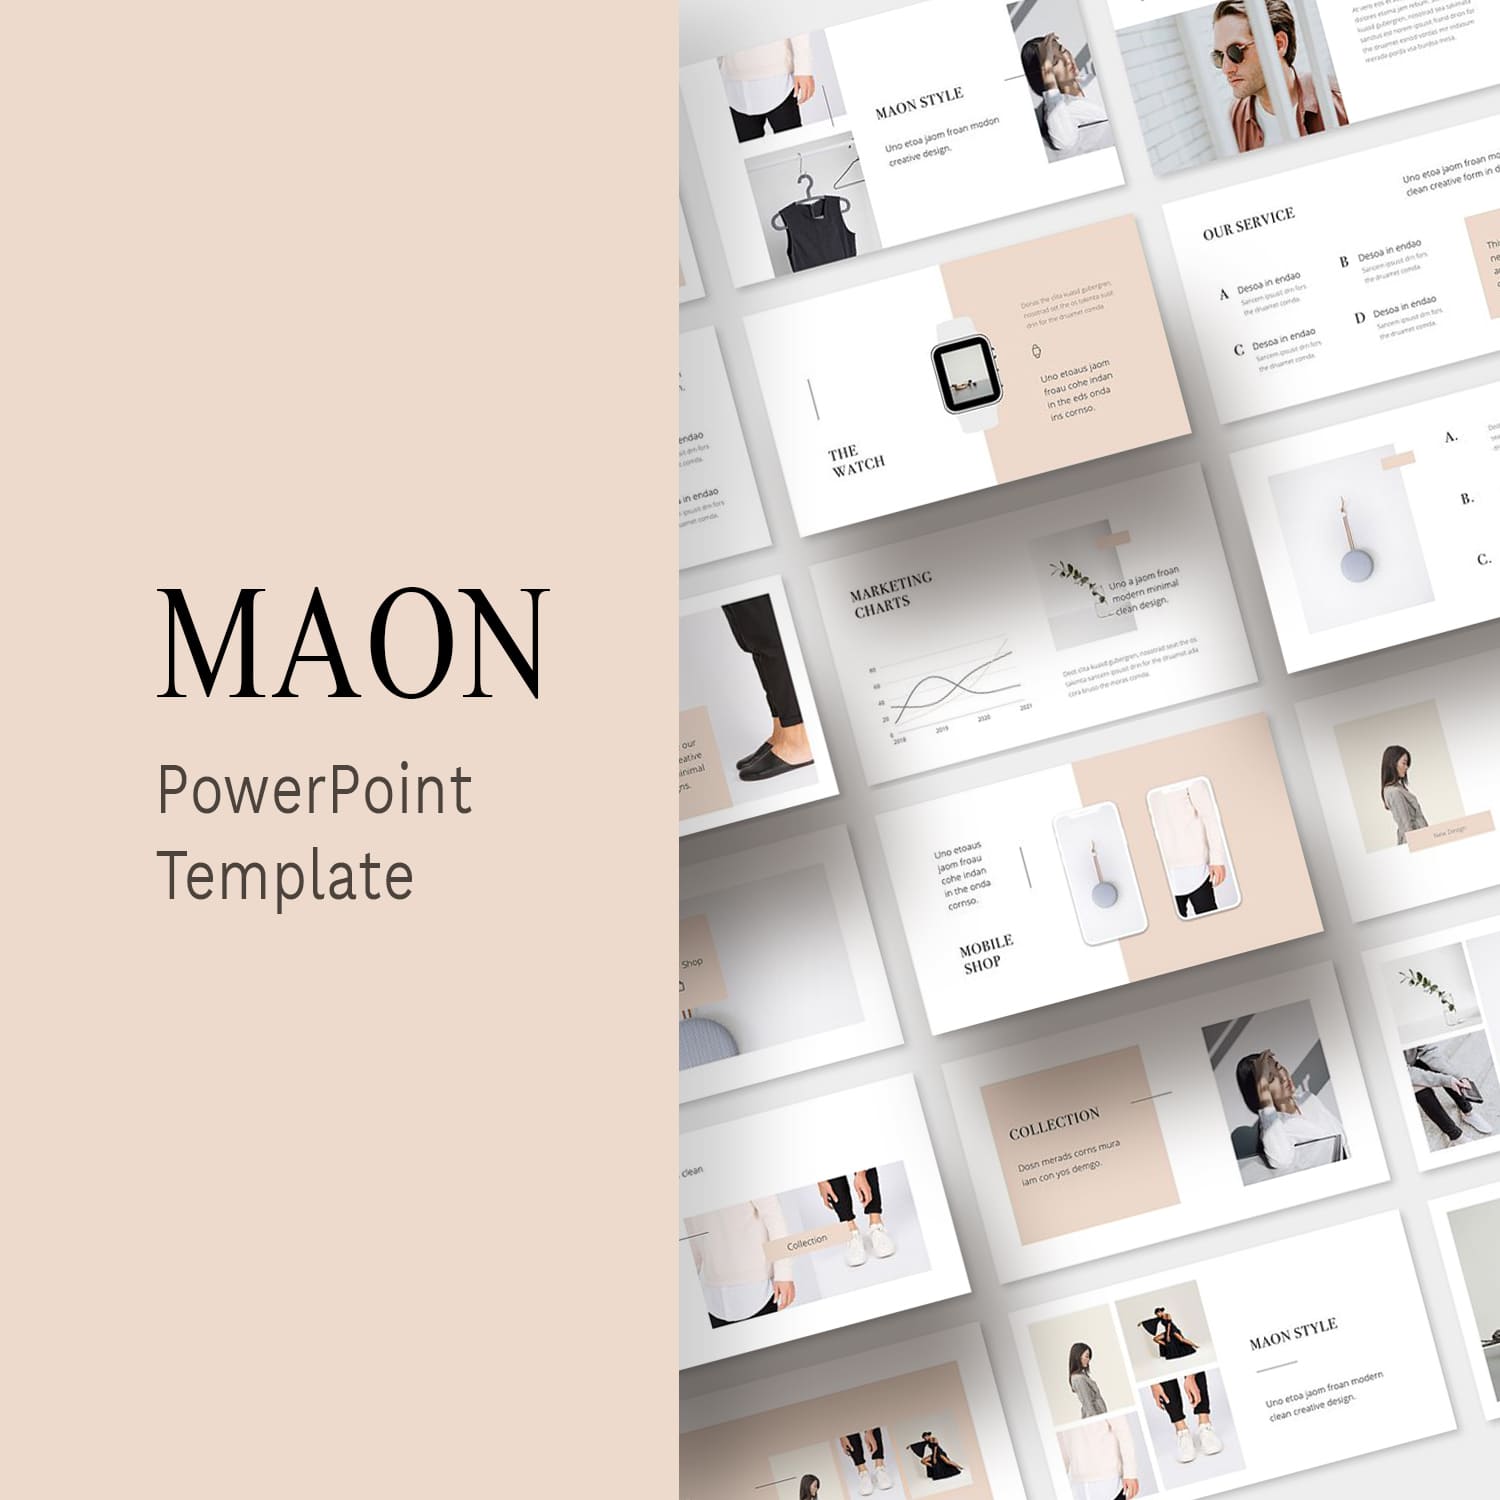 MAON - Powerpoint Template by MasterBundles.